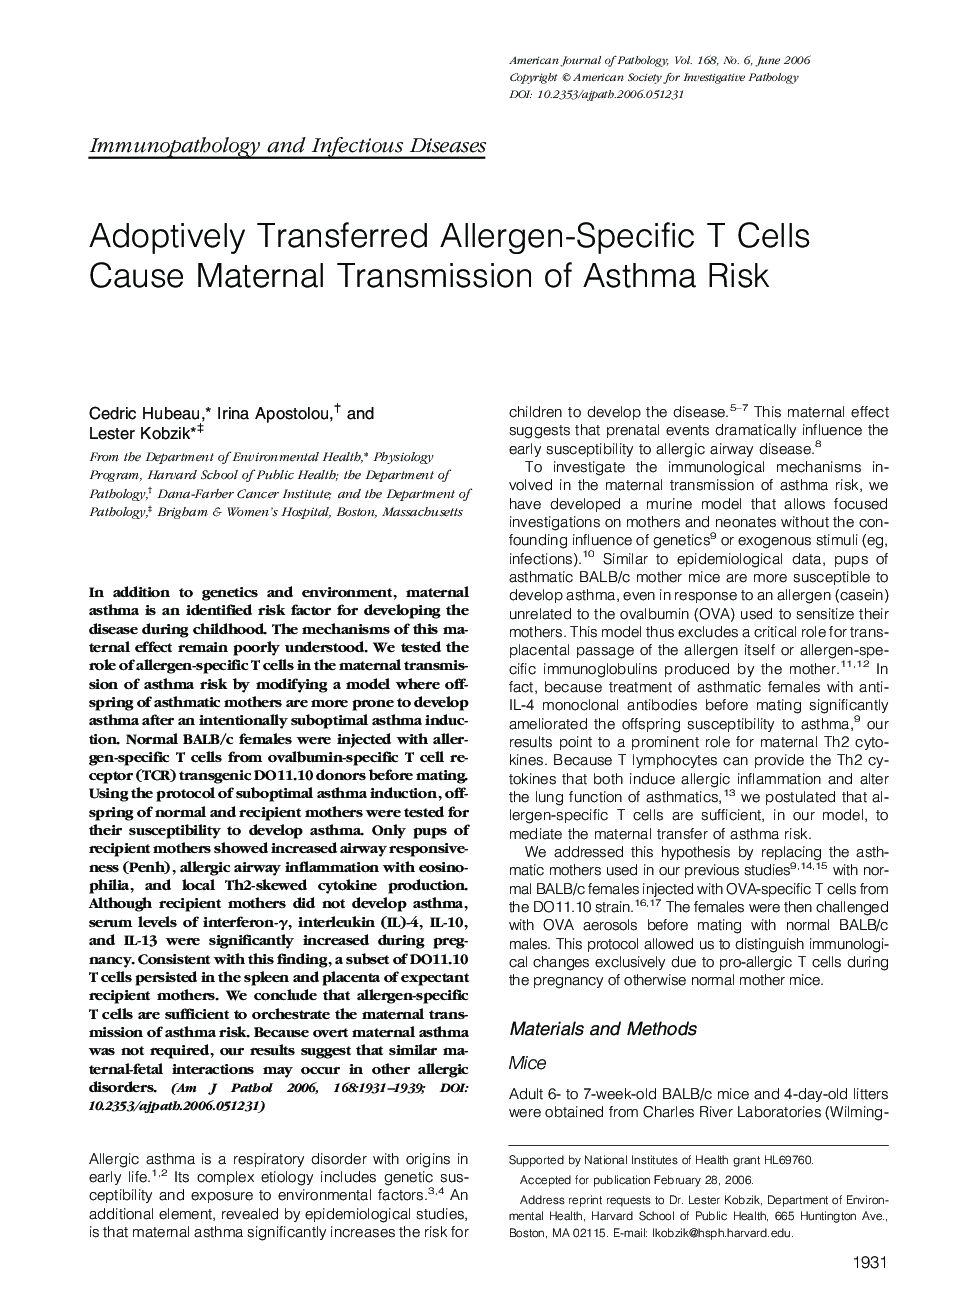 Adoptively Transferred Allergen-Specific T Cells Cause Maternal Transmission of Asthma Risk 